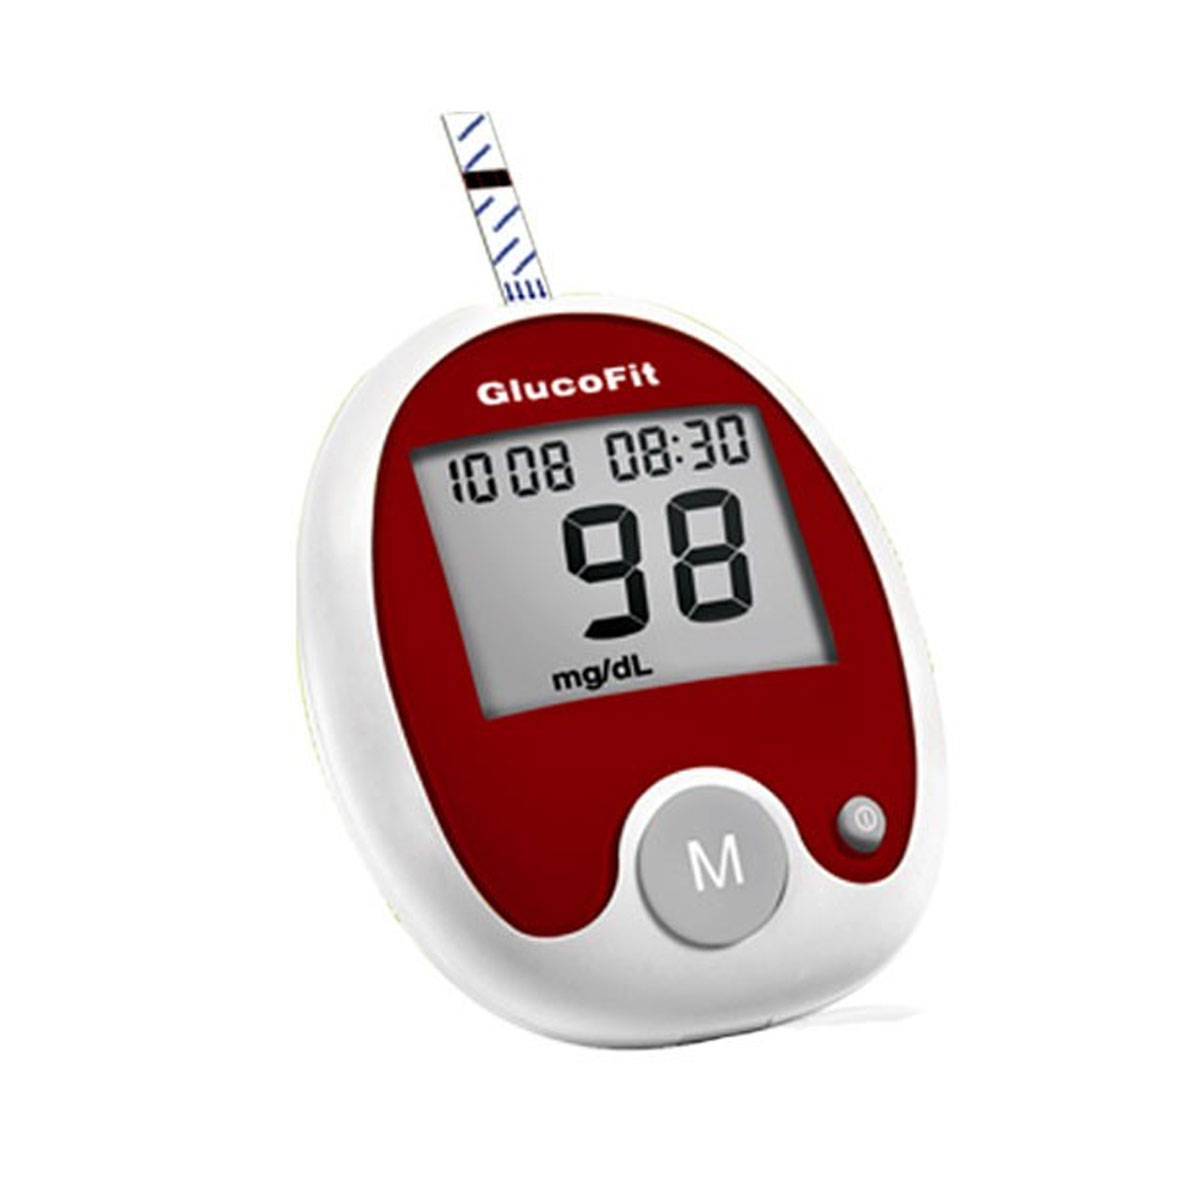 Gluco Fit Blood Glucose Monitor With 10 Test Strips Gallery Image 2